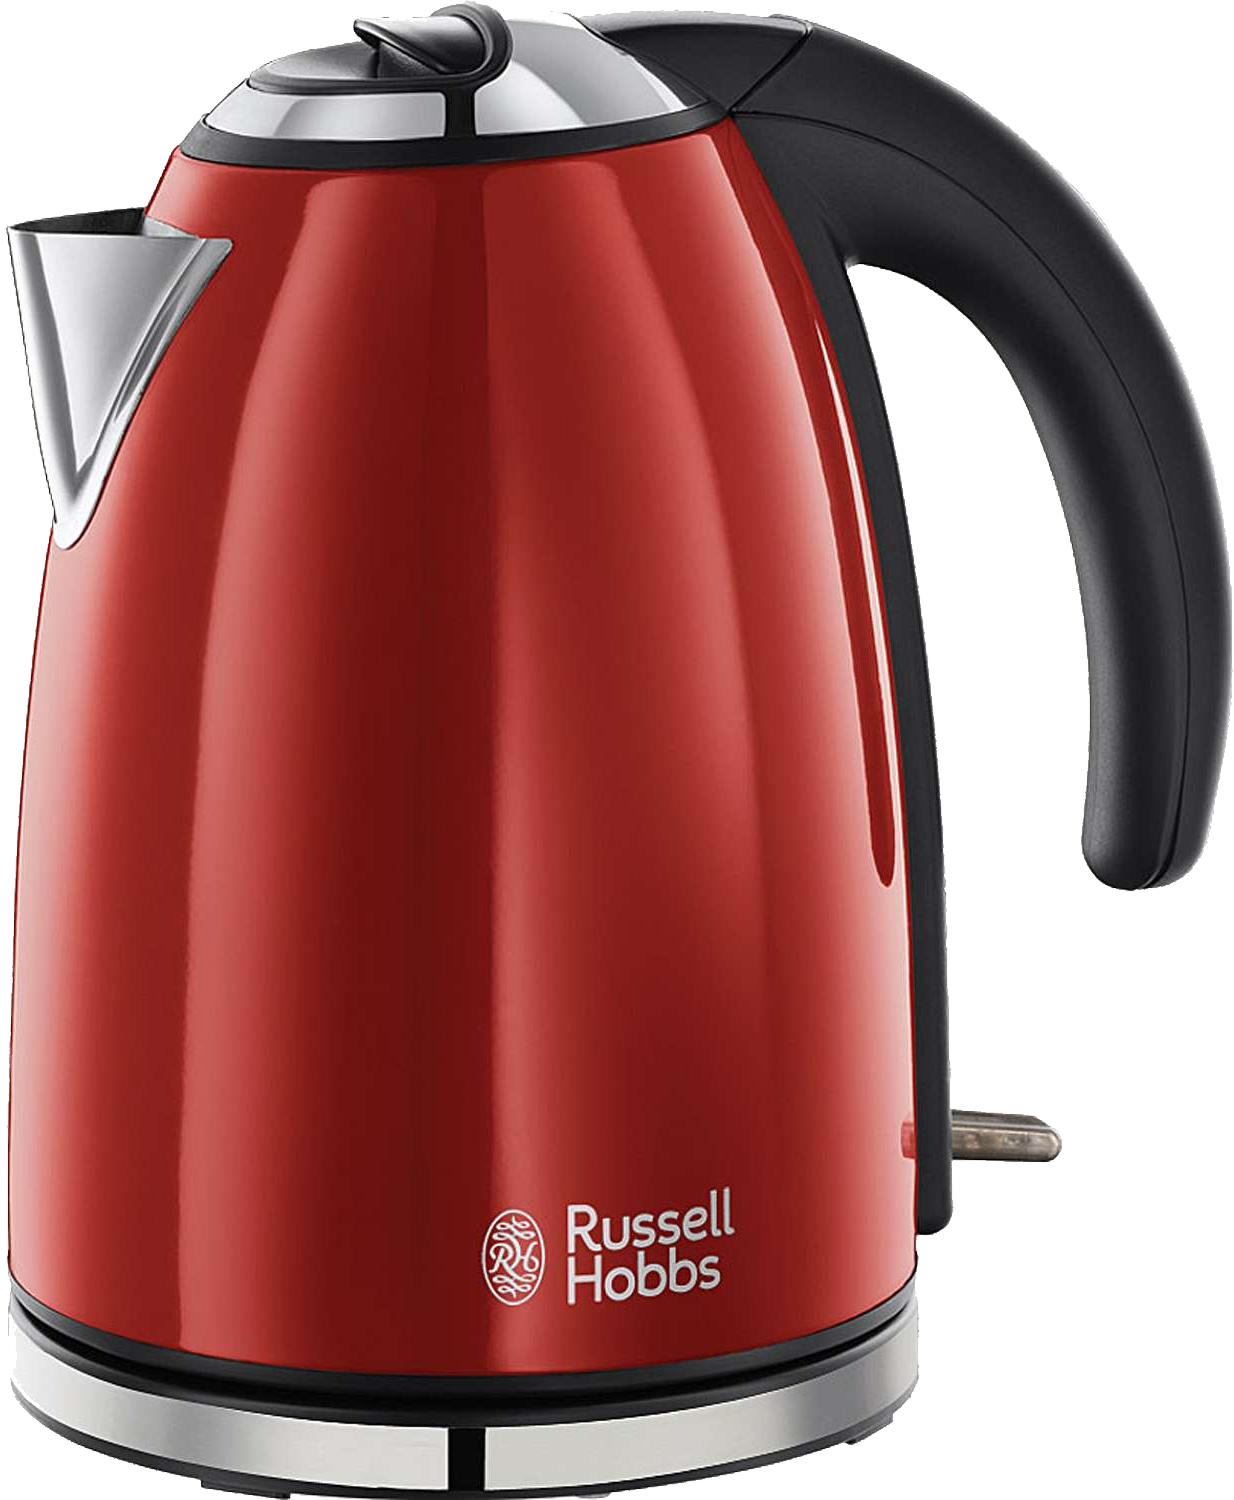 Kettle PNG - 26805